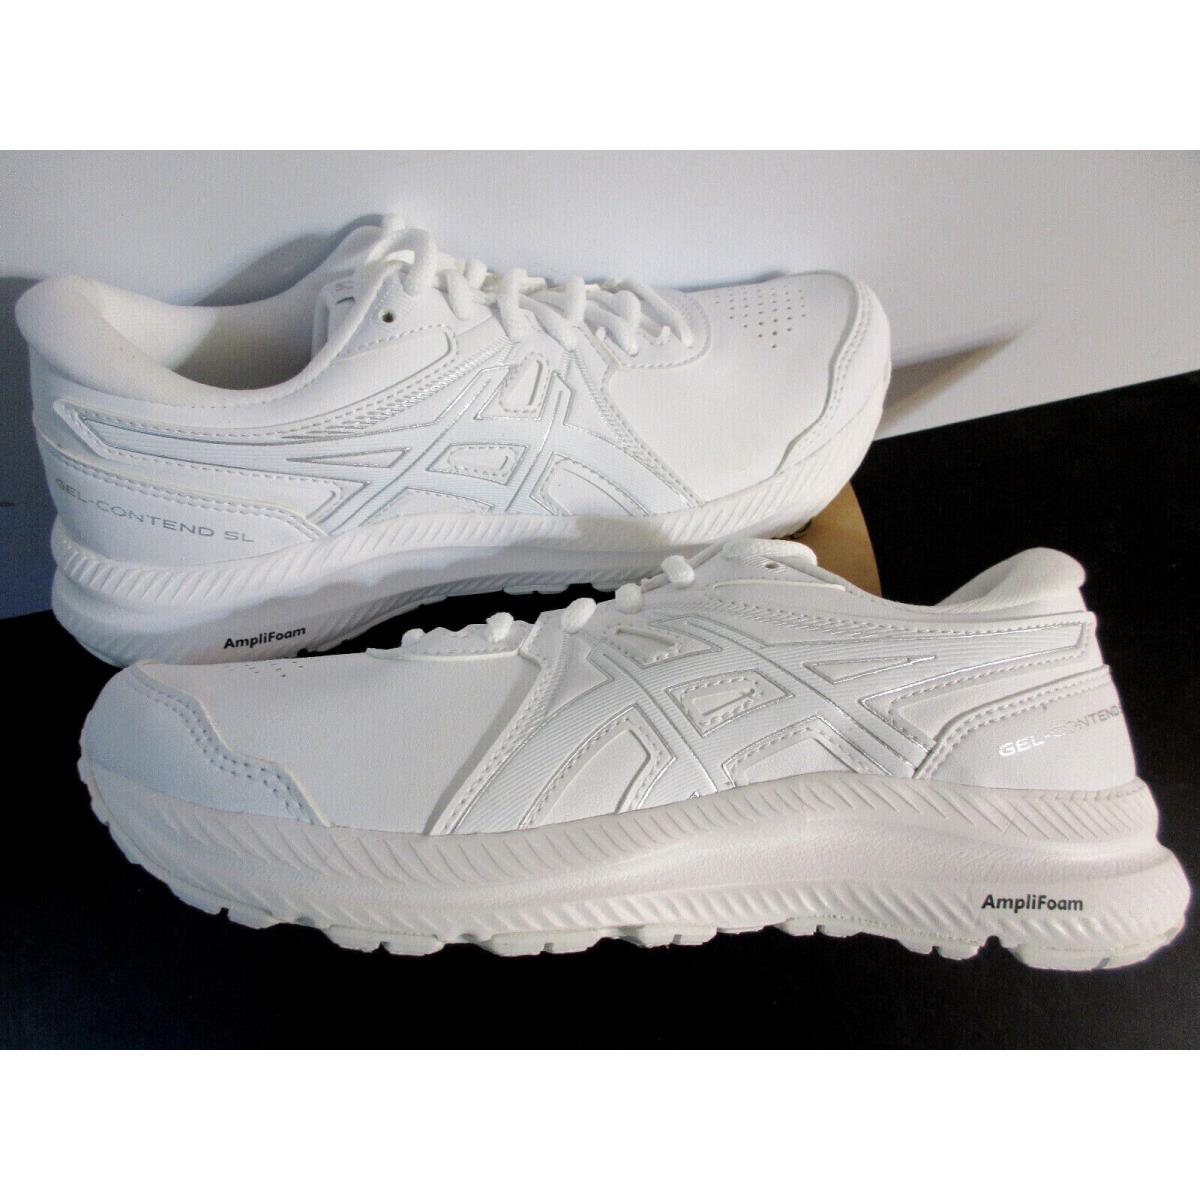 Womens Asics Gel Contend SL Shoes White 1132A057-100 Size  M |  041686666265 - ASICS shoes - White | SporTipTop